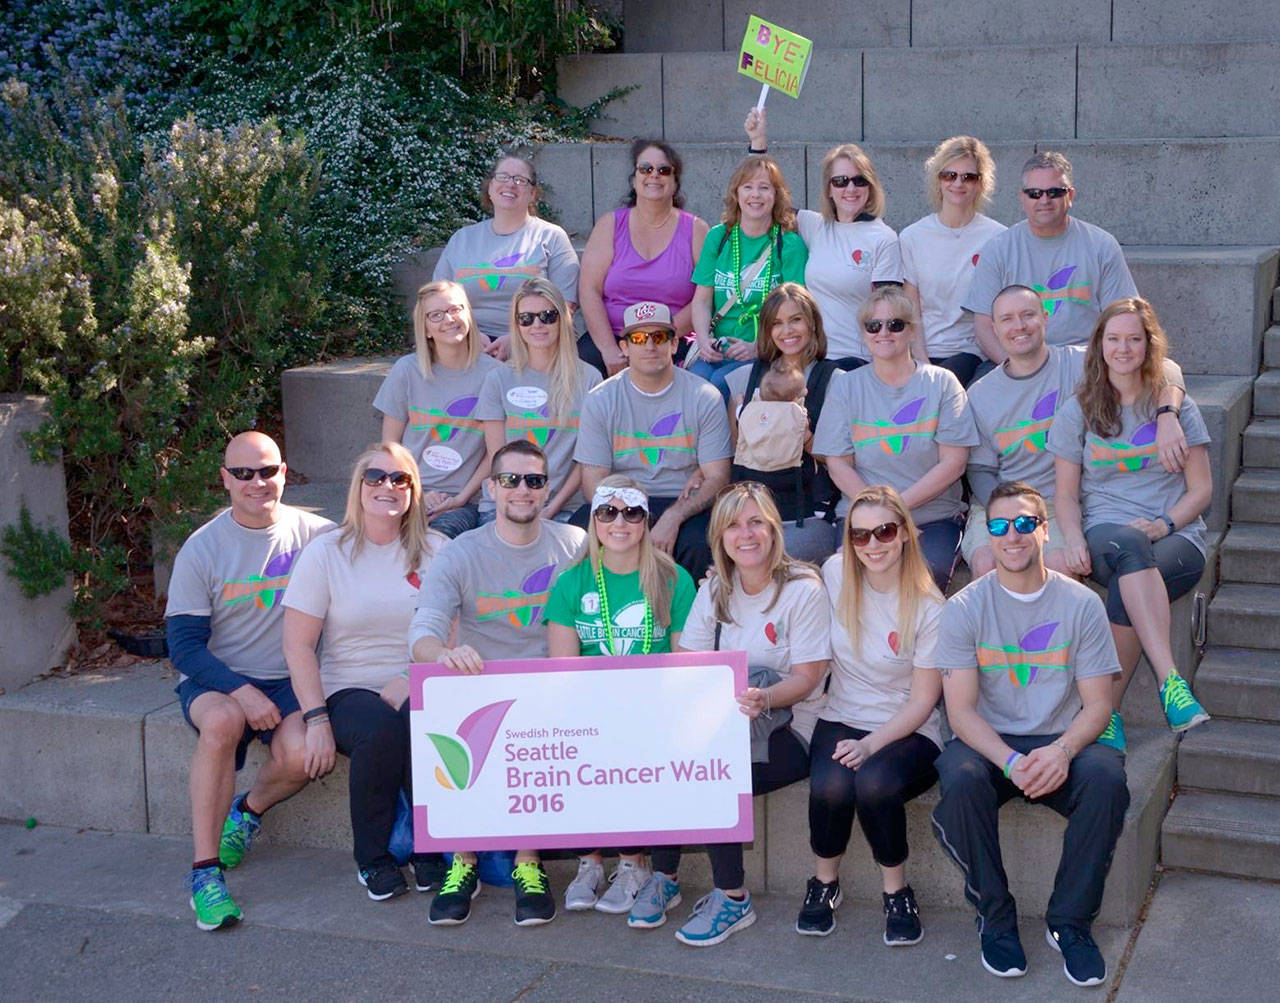 Courtesy Photo                                Kelsey Saty brought out her friends and family to support the fundraising efforts for brain cancer research at the 2016 Seattle Brain Cancer Walk.